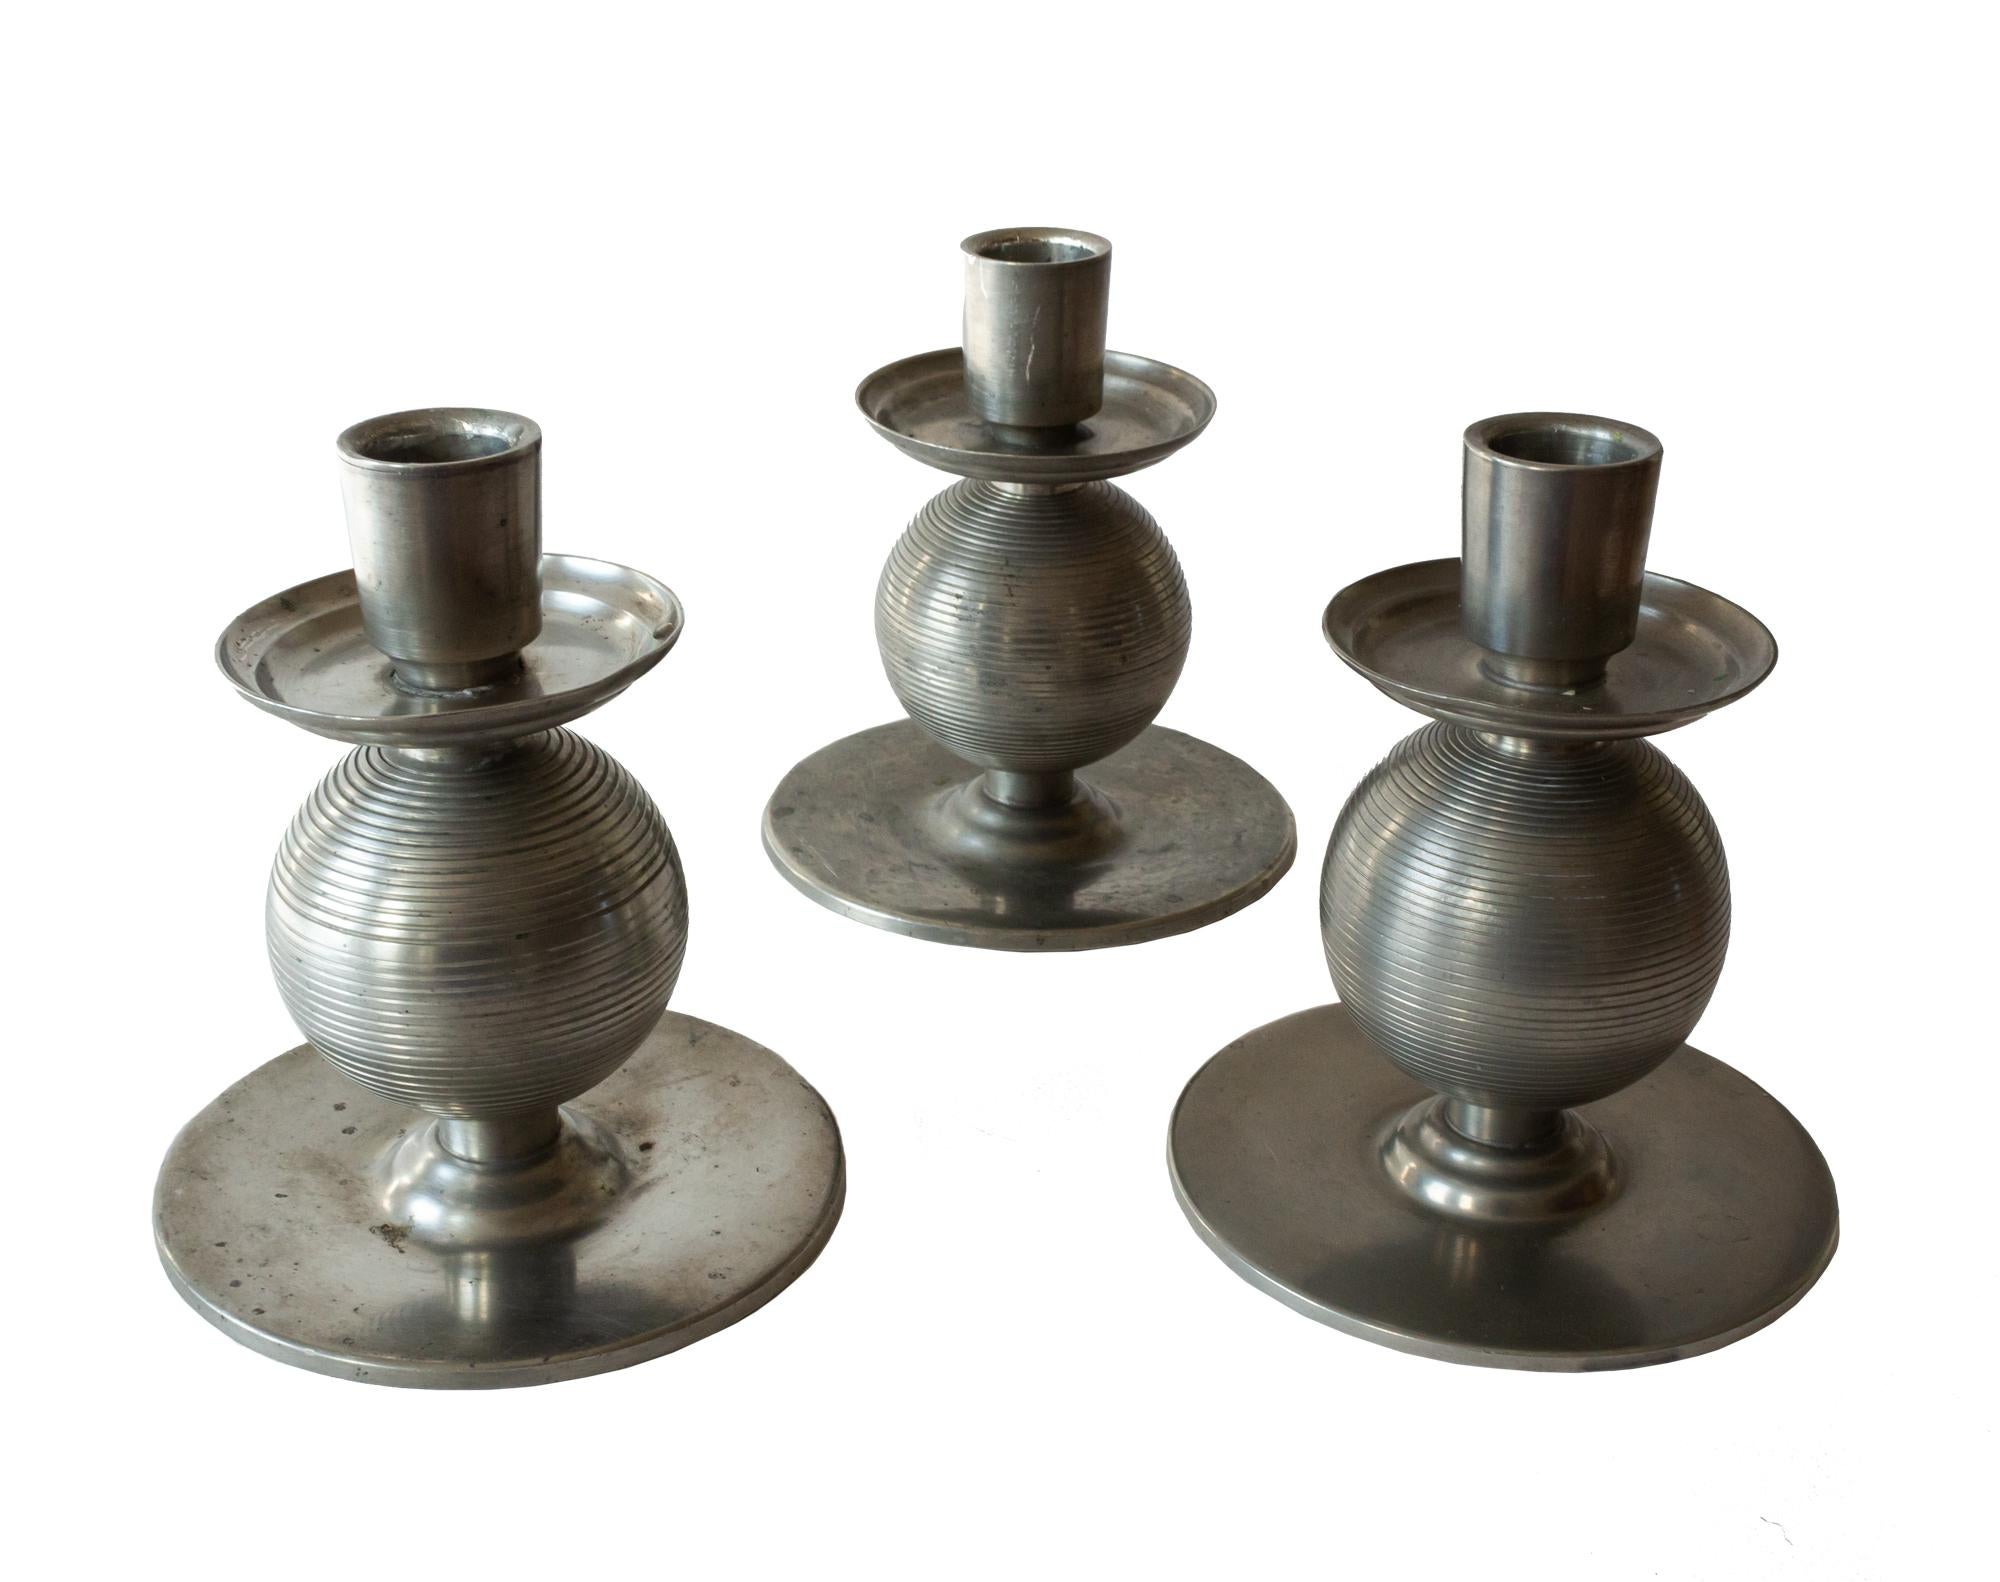 Three elegant, functionalist Art Deco pewter candlesticks by Nils Fougstedt made 1937. Embossed stripes around the sphere. Signed and stamped Nils Fougstedt and FAK, L8, Svenskt Tenn. Measures: Height 13.5, sphere 6, and the base 12 cm.
In 1924,